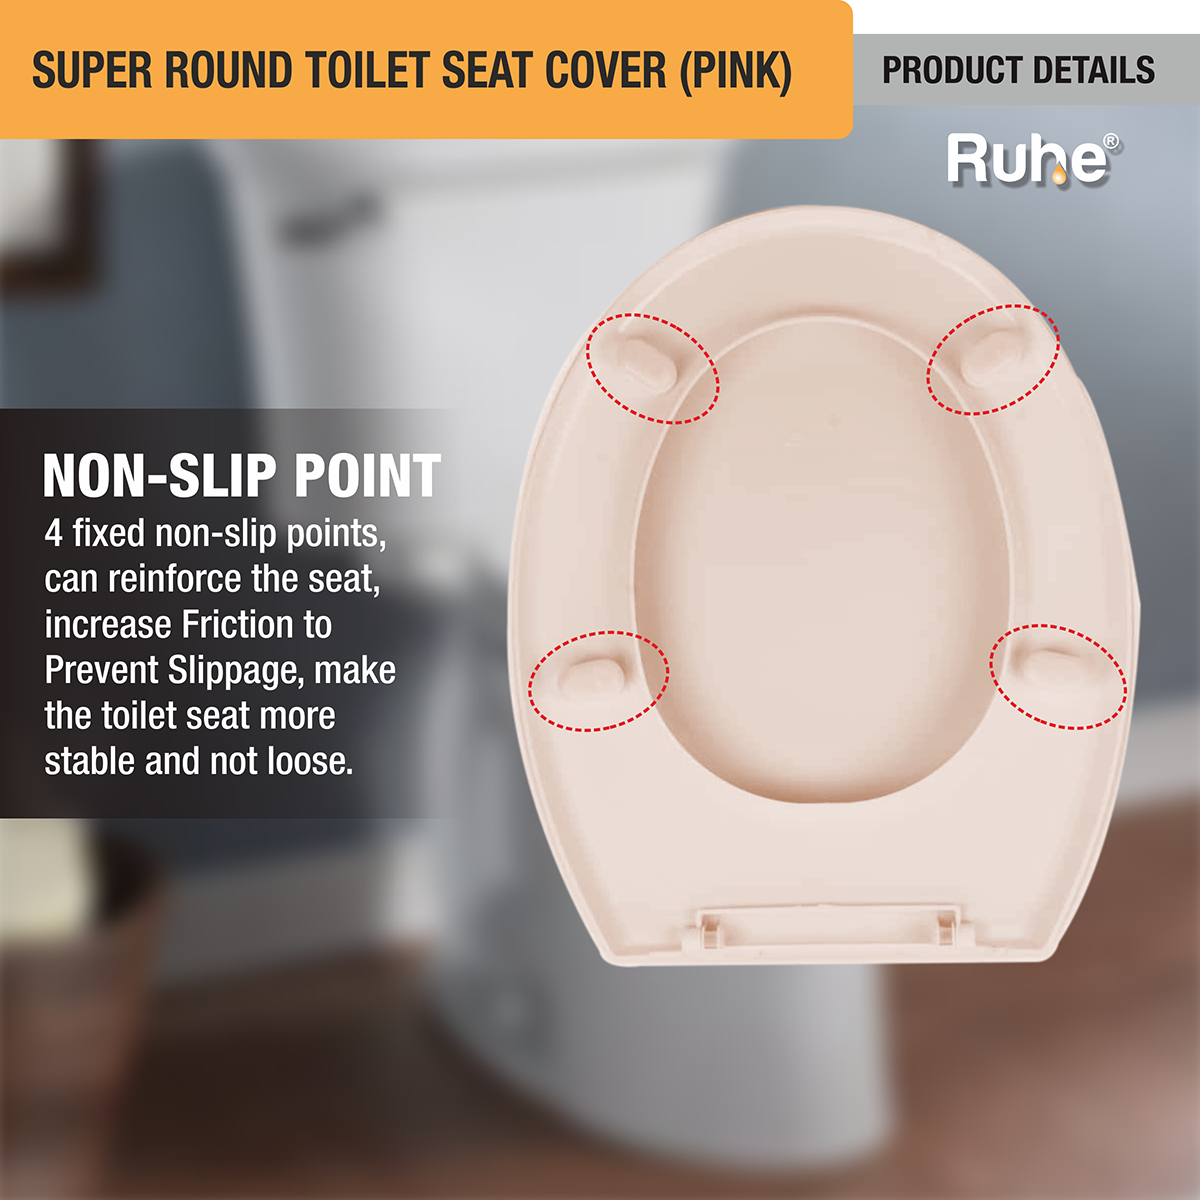 Super Round Toilet Seat Cover (Pink) product details